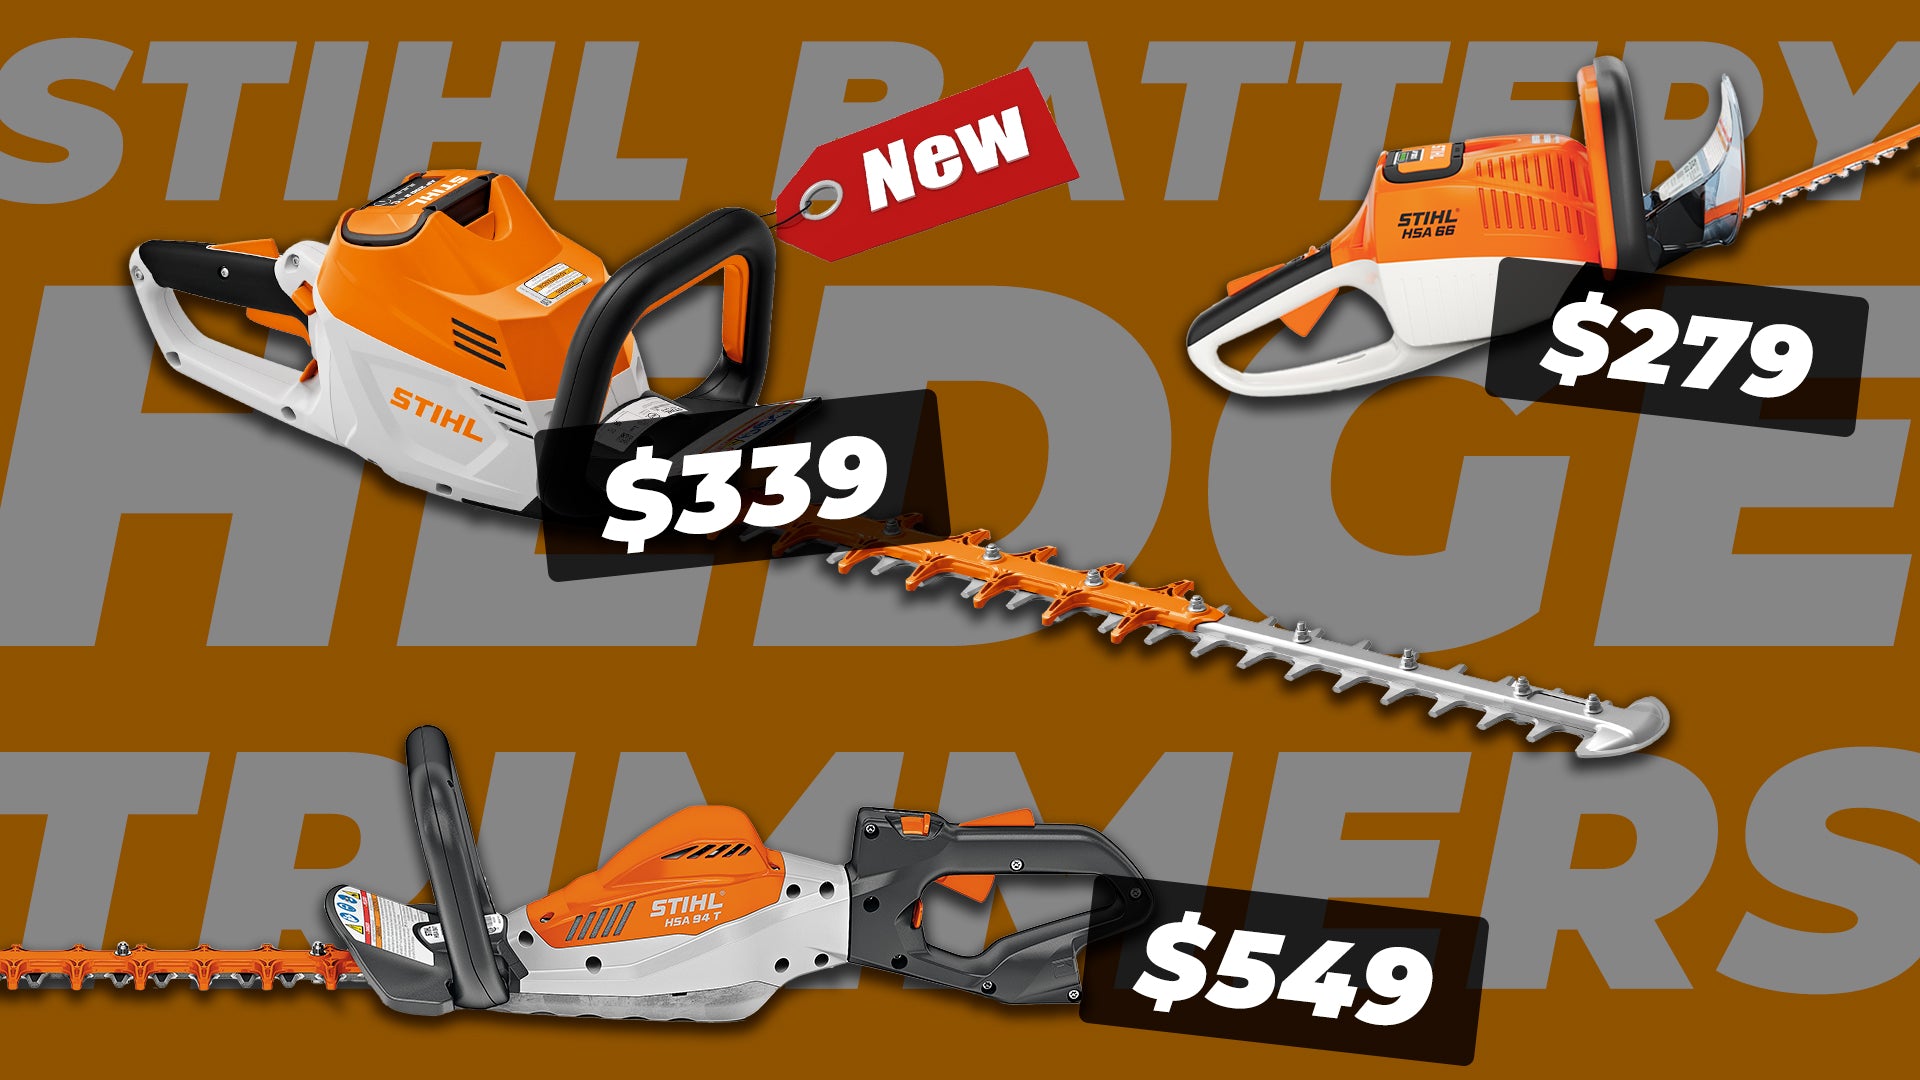 Looking for a powerful battery hedge trimmer? Watch our STIHL HSA 100 review and see it compared to the HSA 94 T and HSA 65!